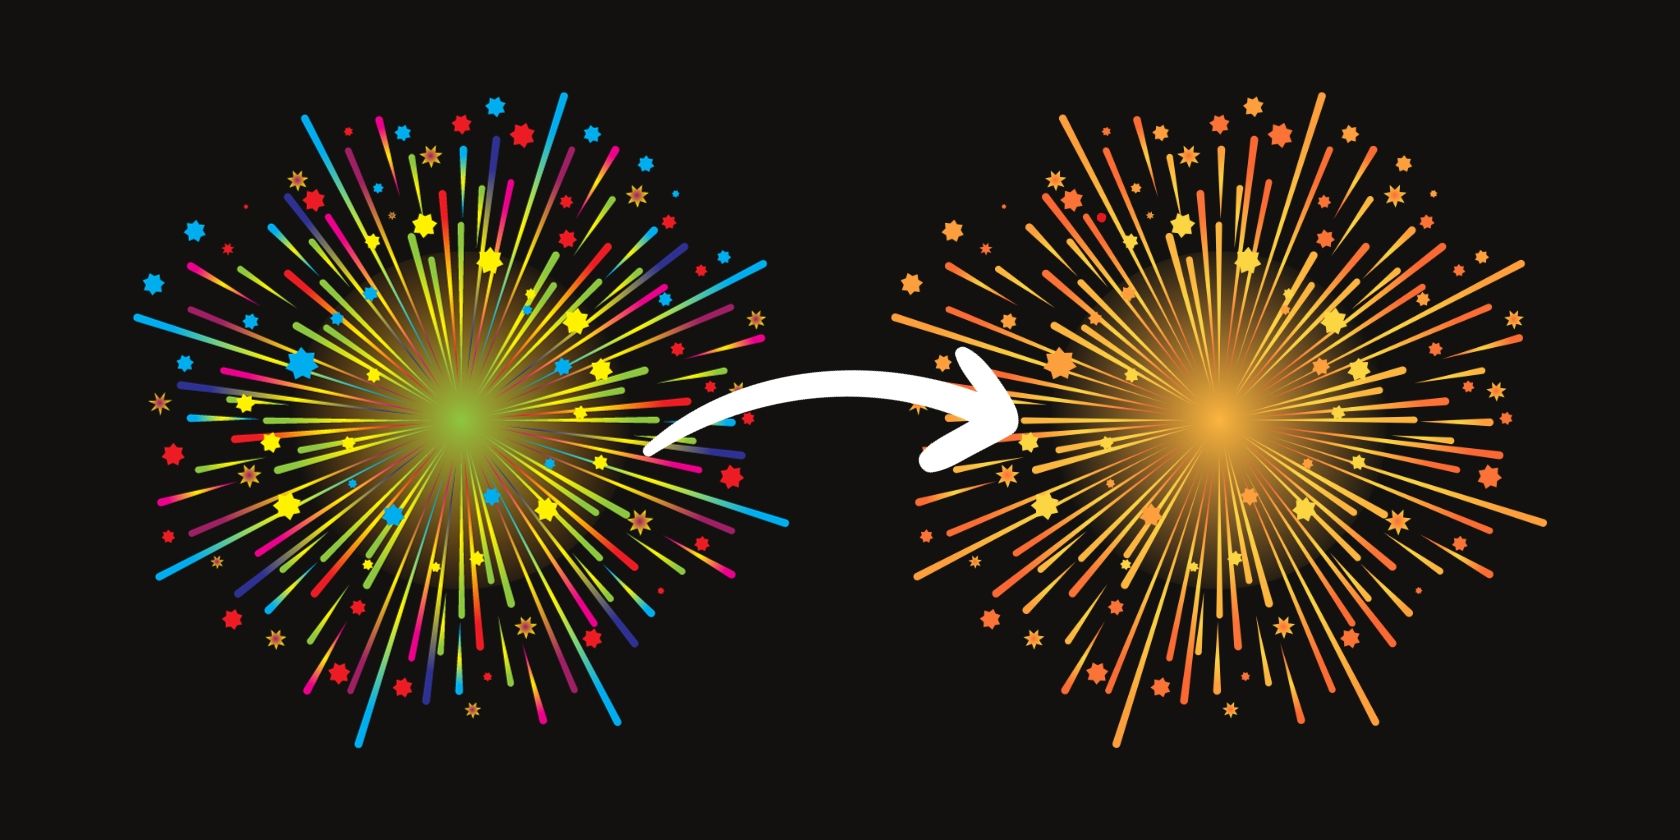 Two Fireworks Graphics on Black Background